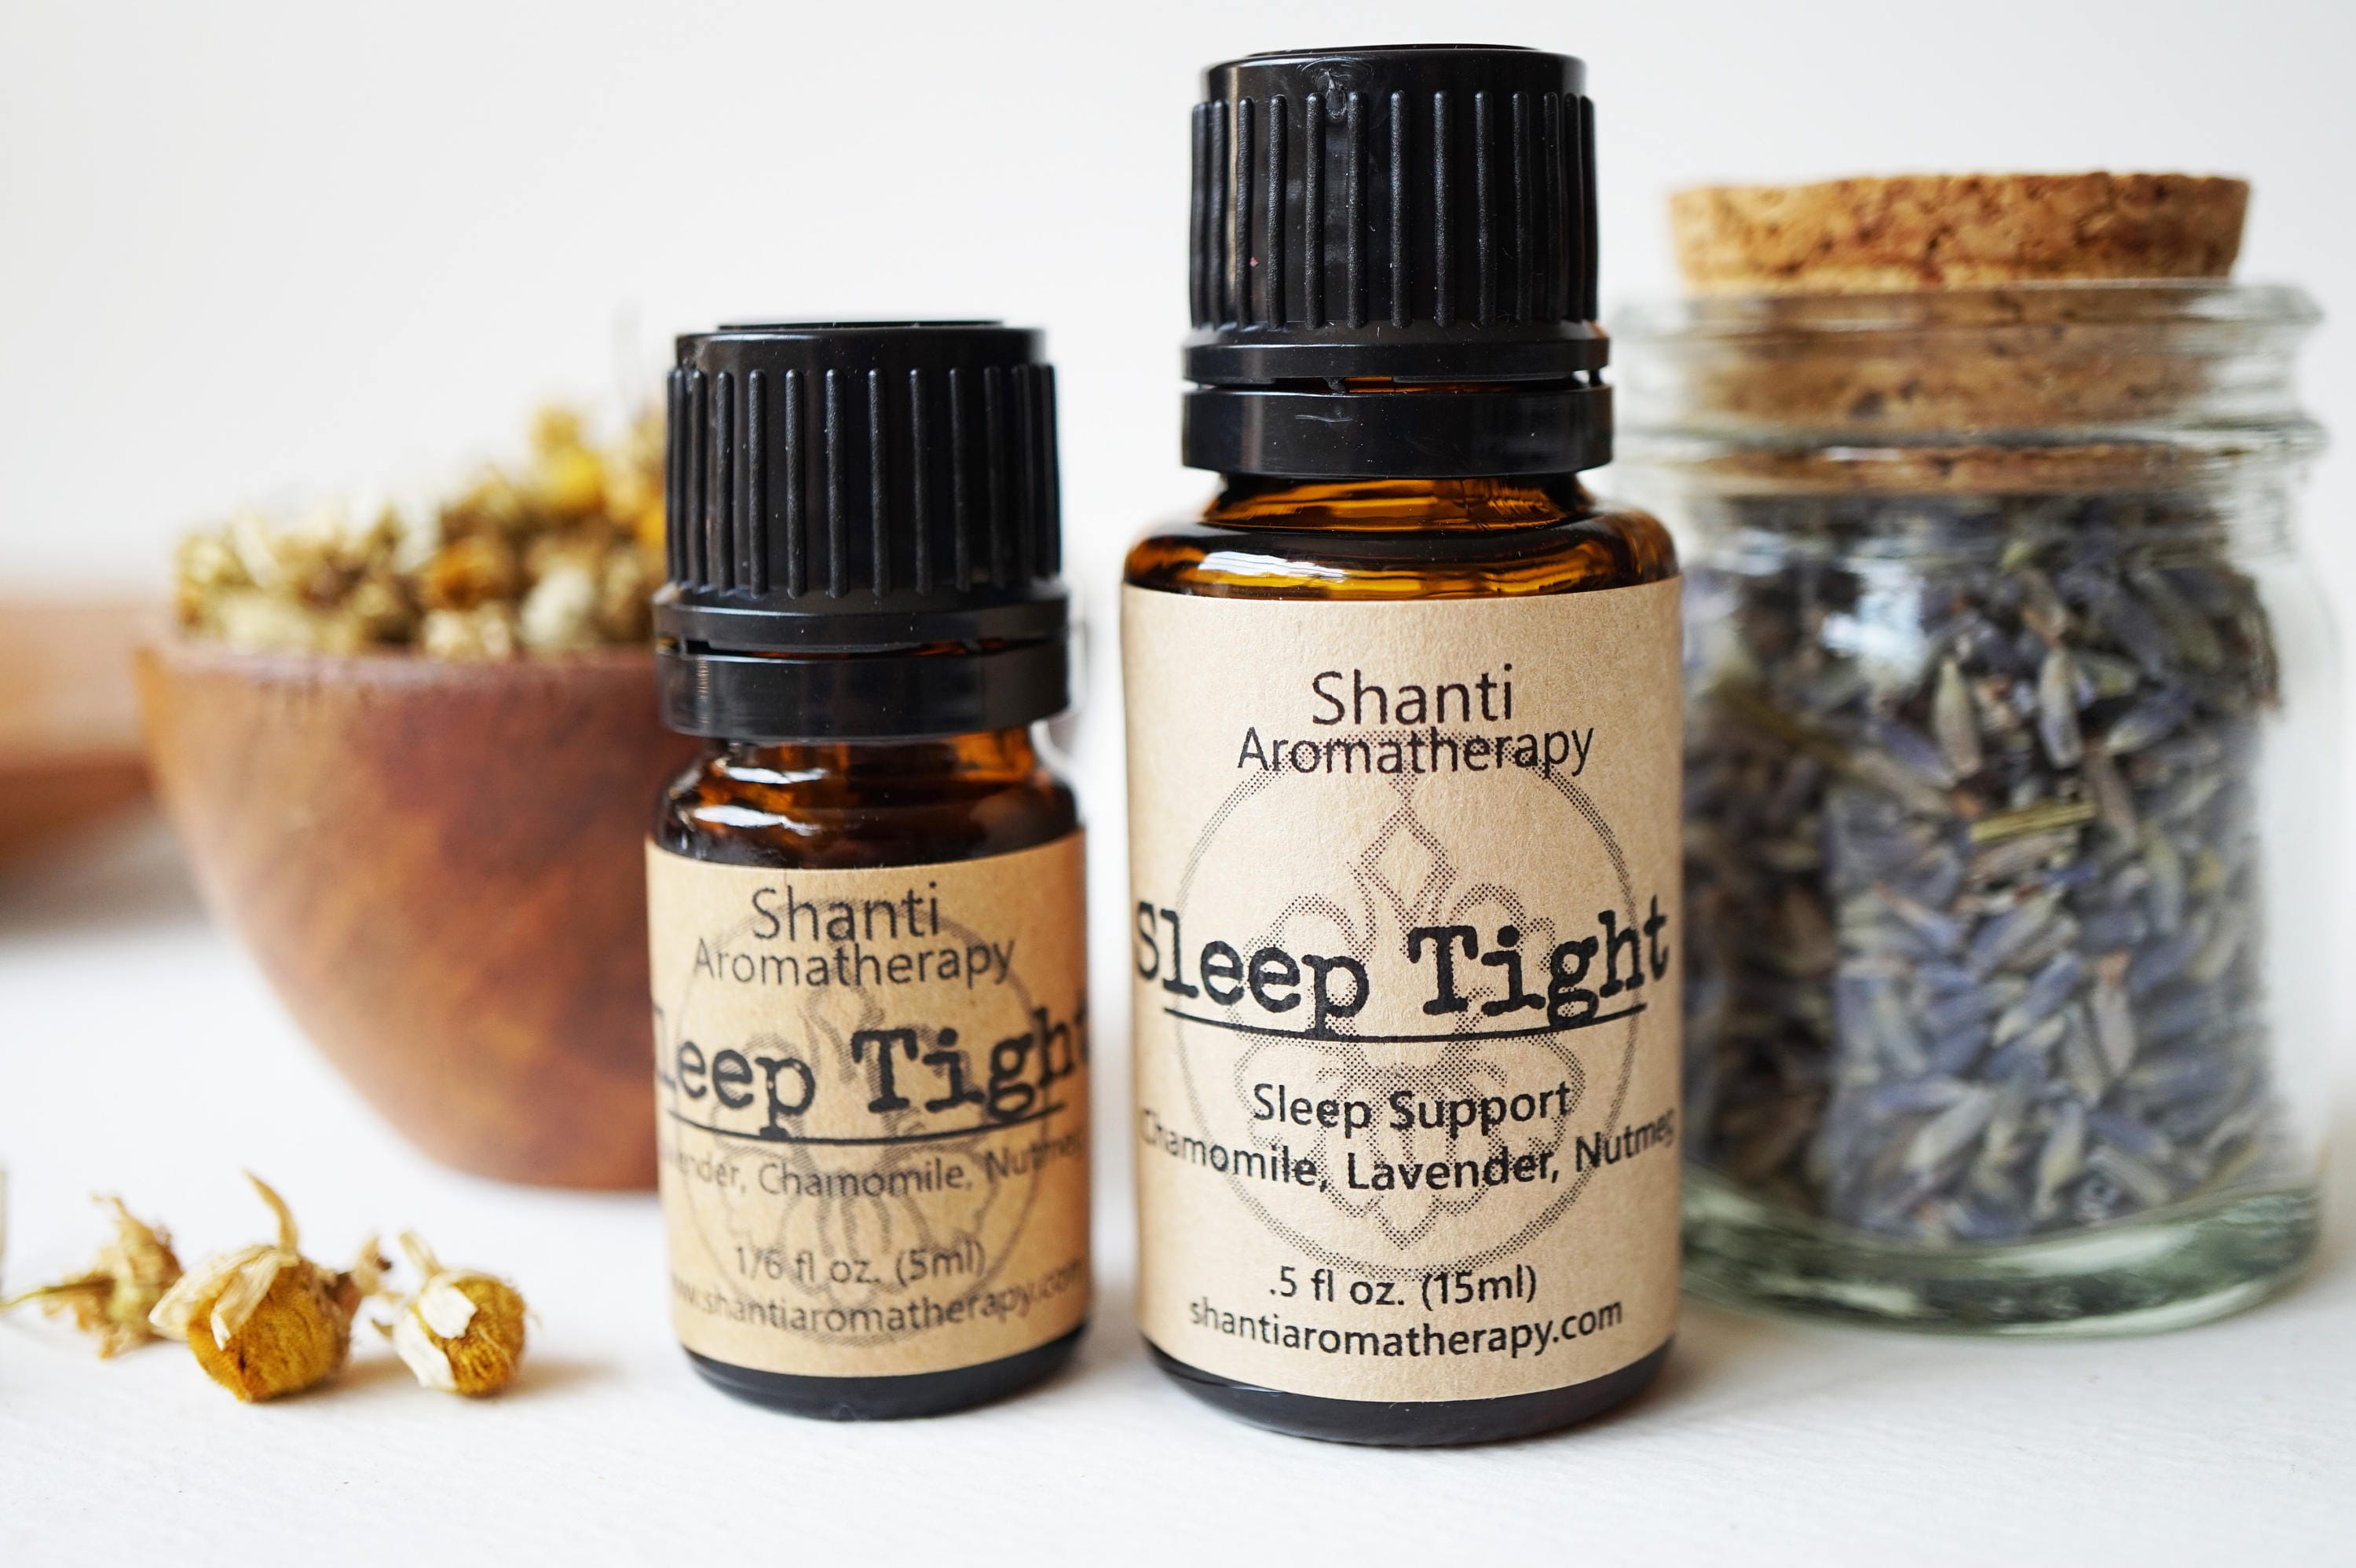 Sleep Tight Aromatherapy Blend - Supports Restful & Relaxation